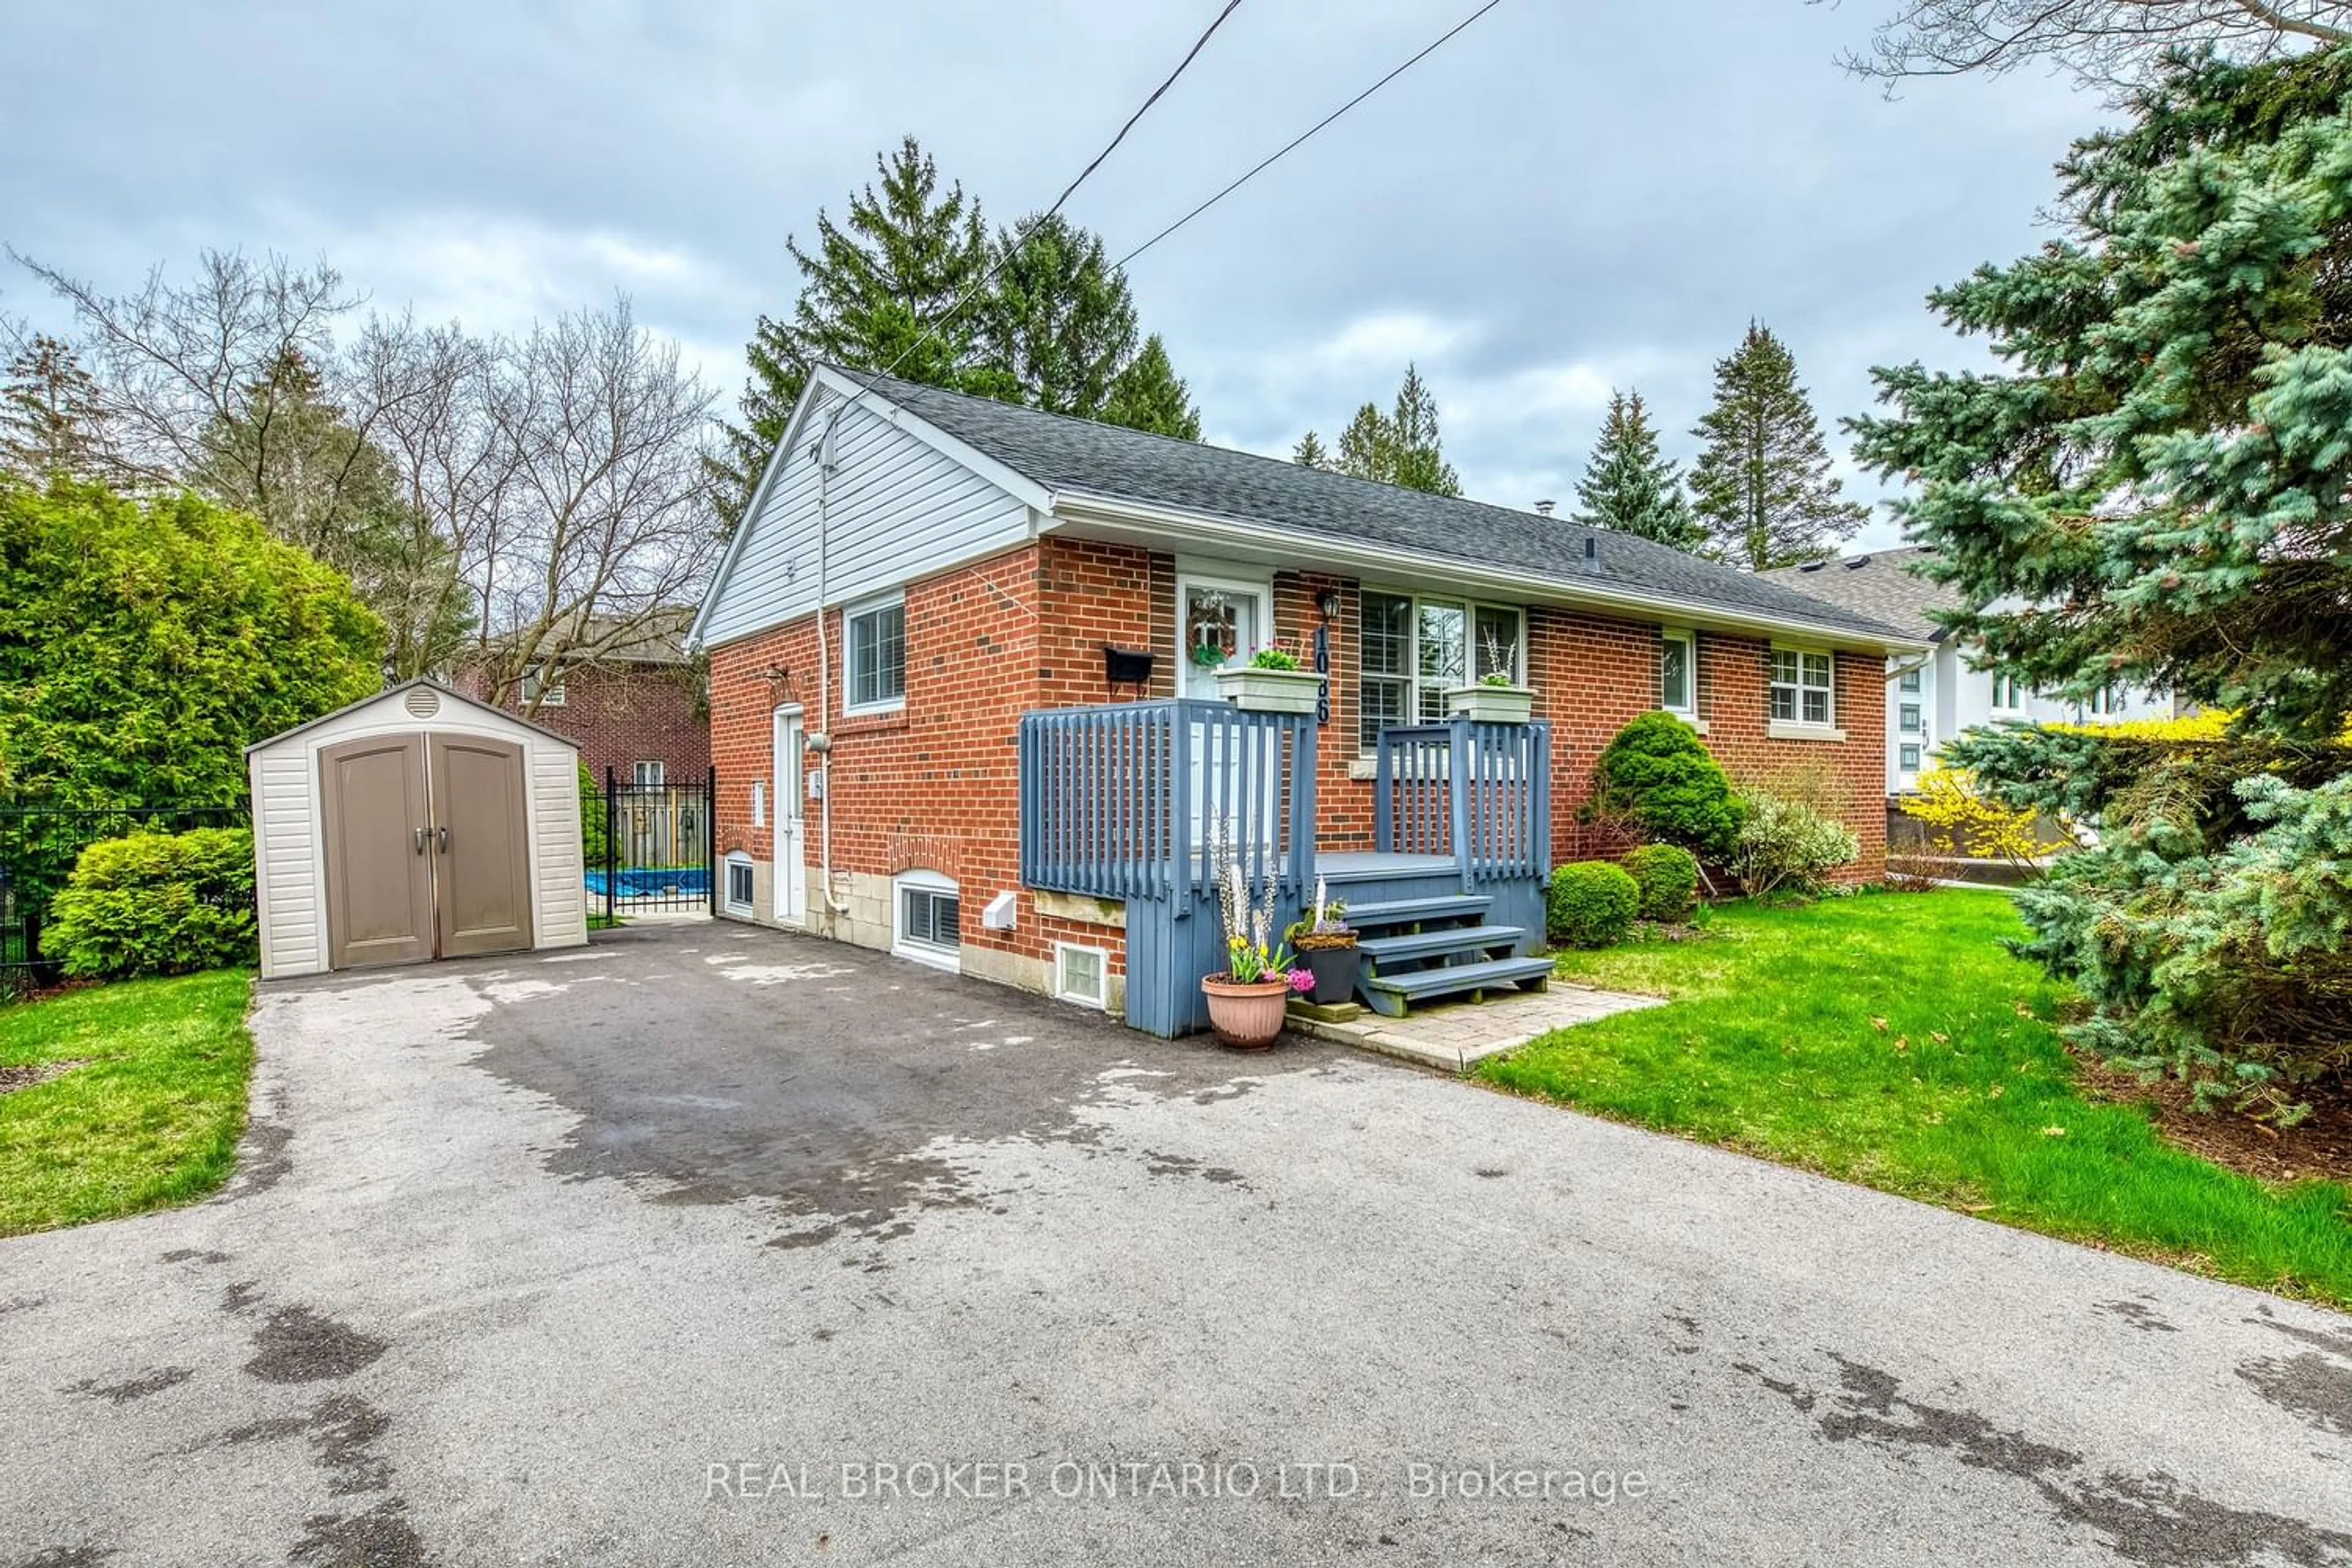 Frontside or backside of a home for 1086 Balment Ave, Mississauga Ontario L5E 1N8